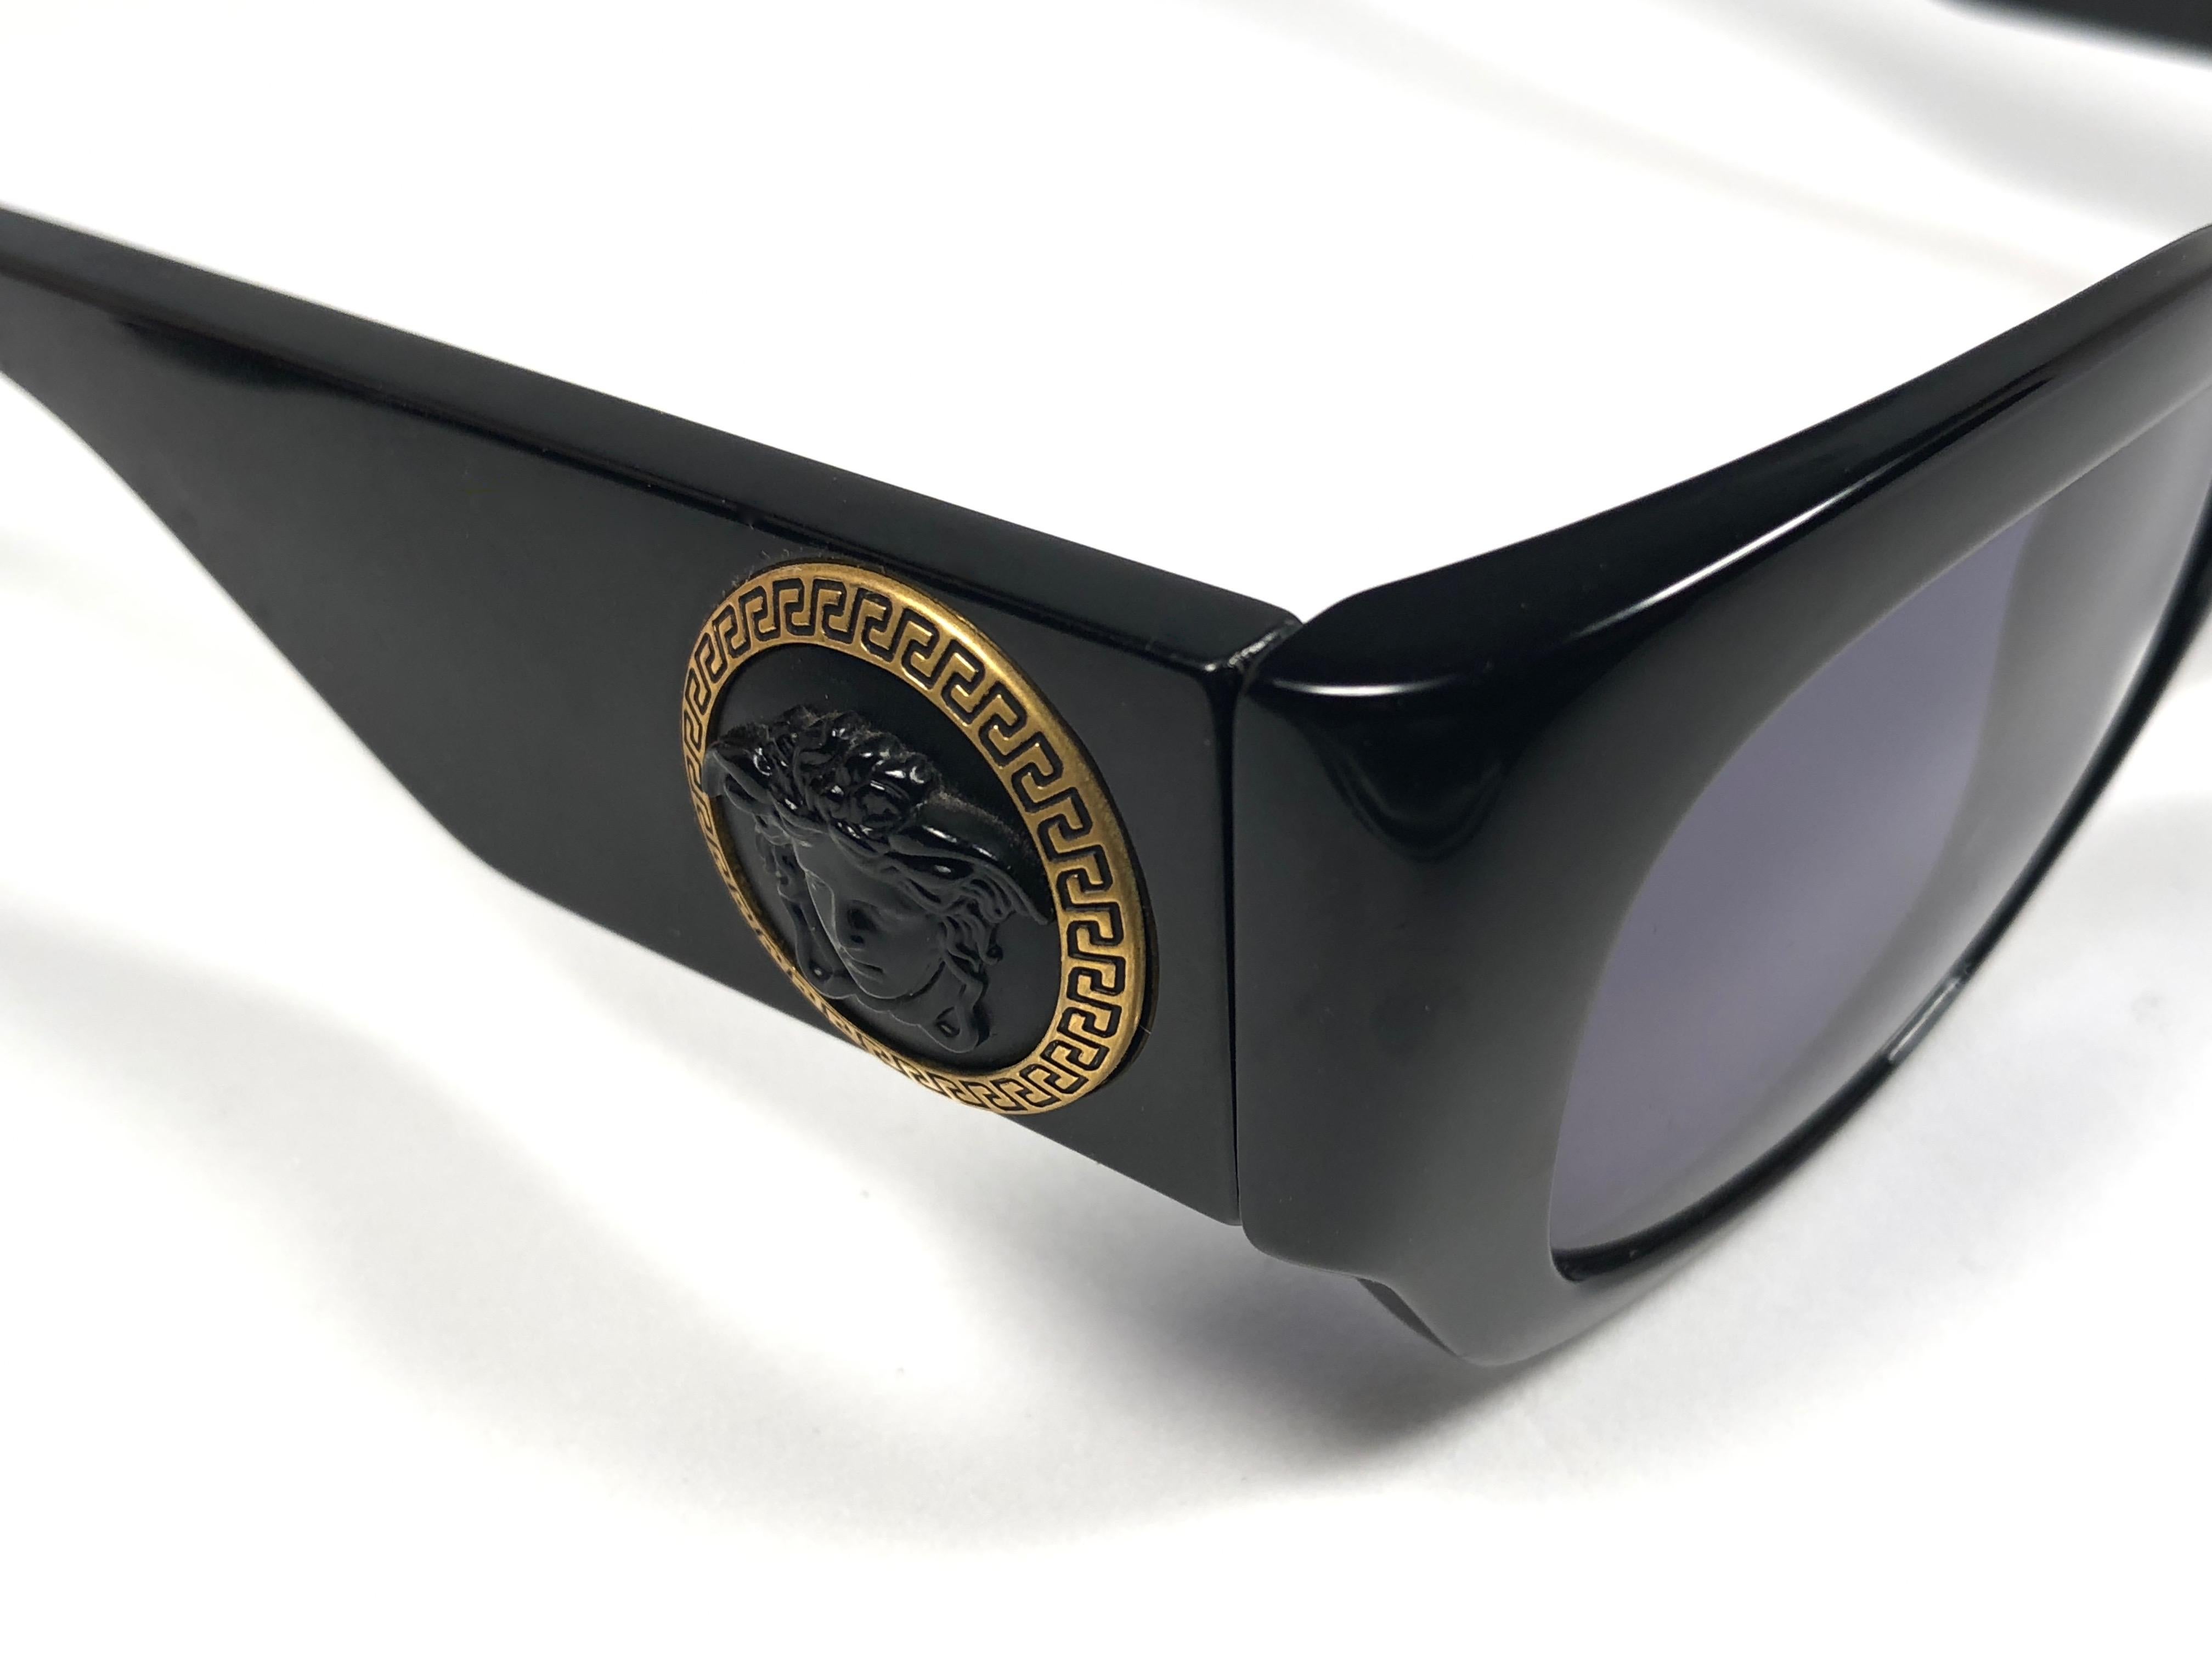 Vintage Gianni Versace 420 E Sleek Black Sunglasses 1990's Made in Italy For Sale 2